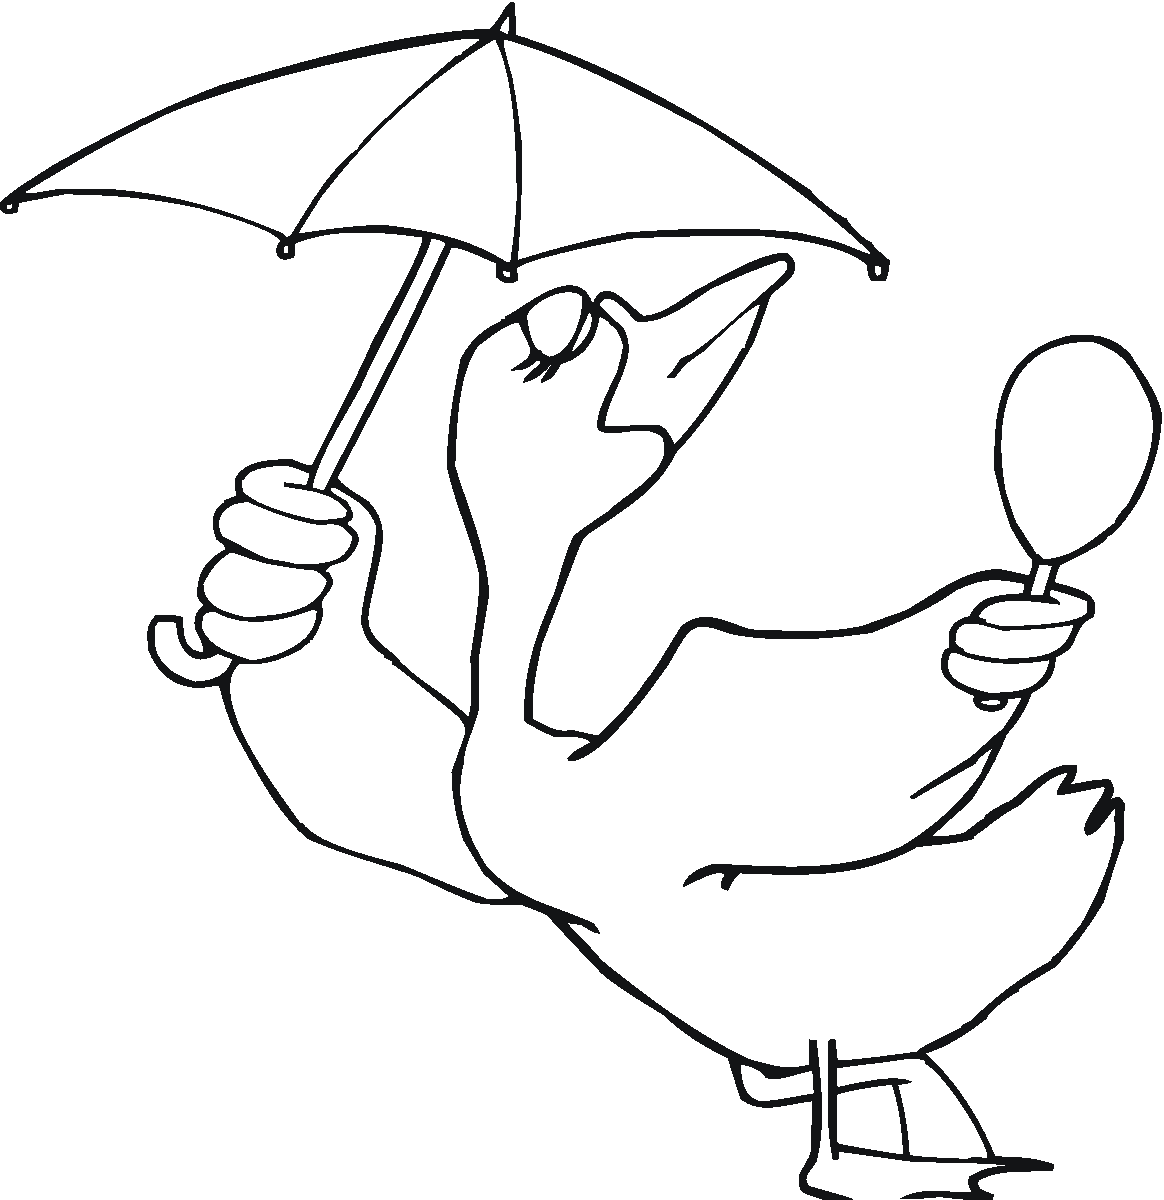 Goose With Umbrella Coloring Online | Super Coloring